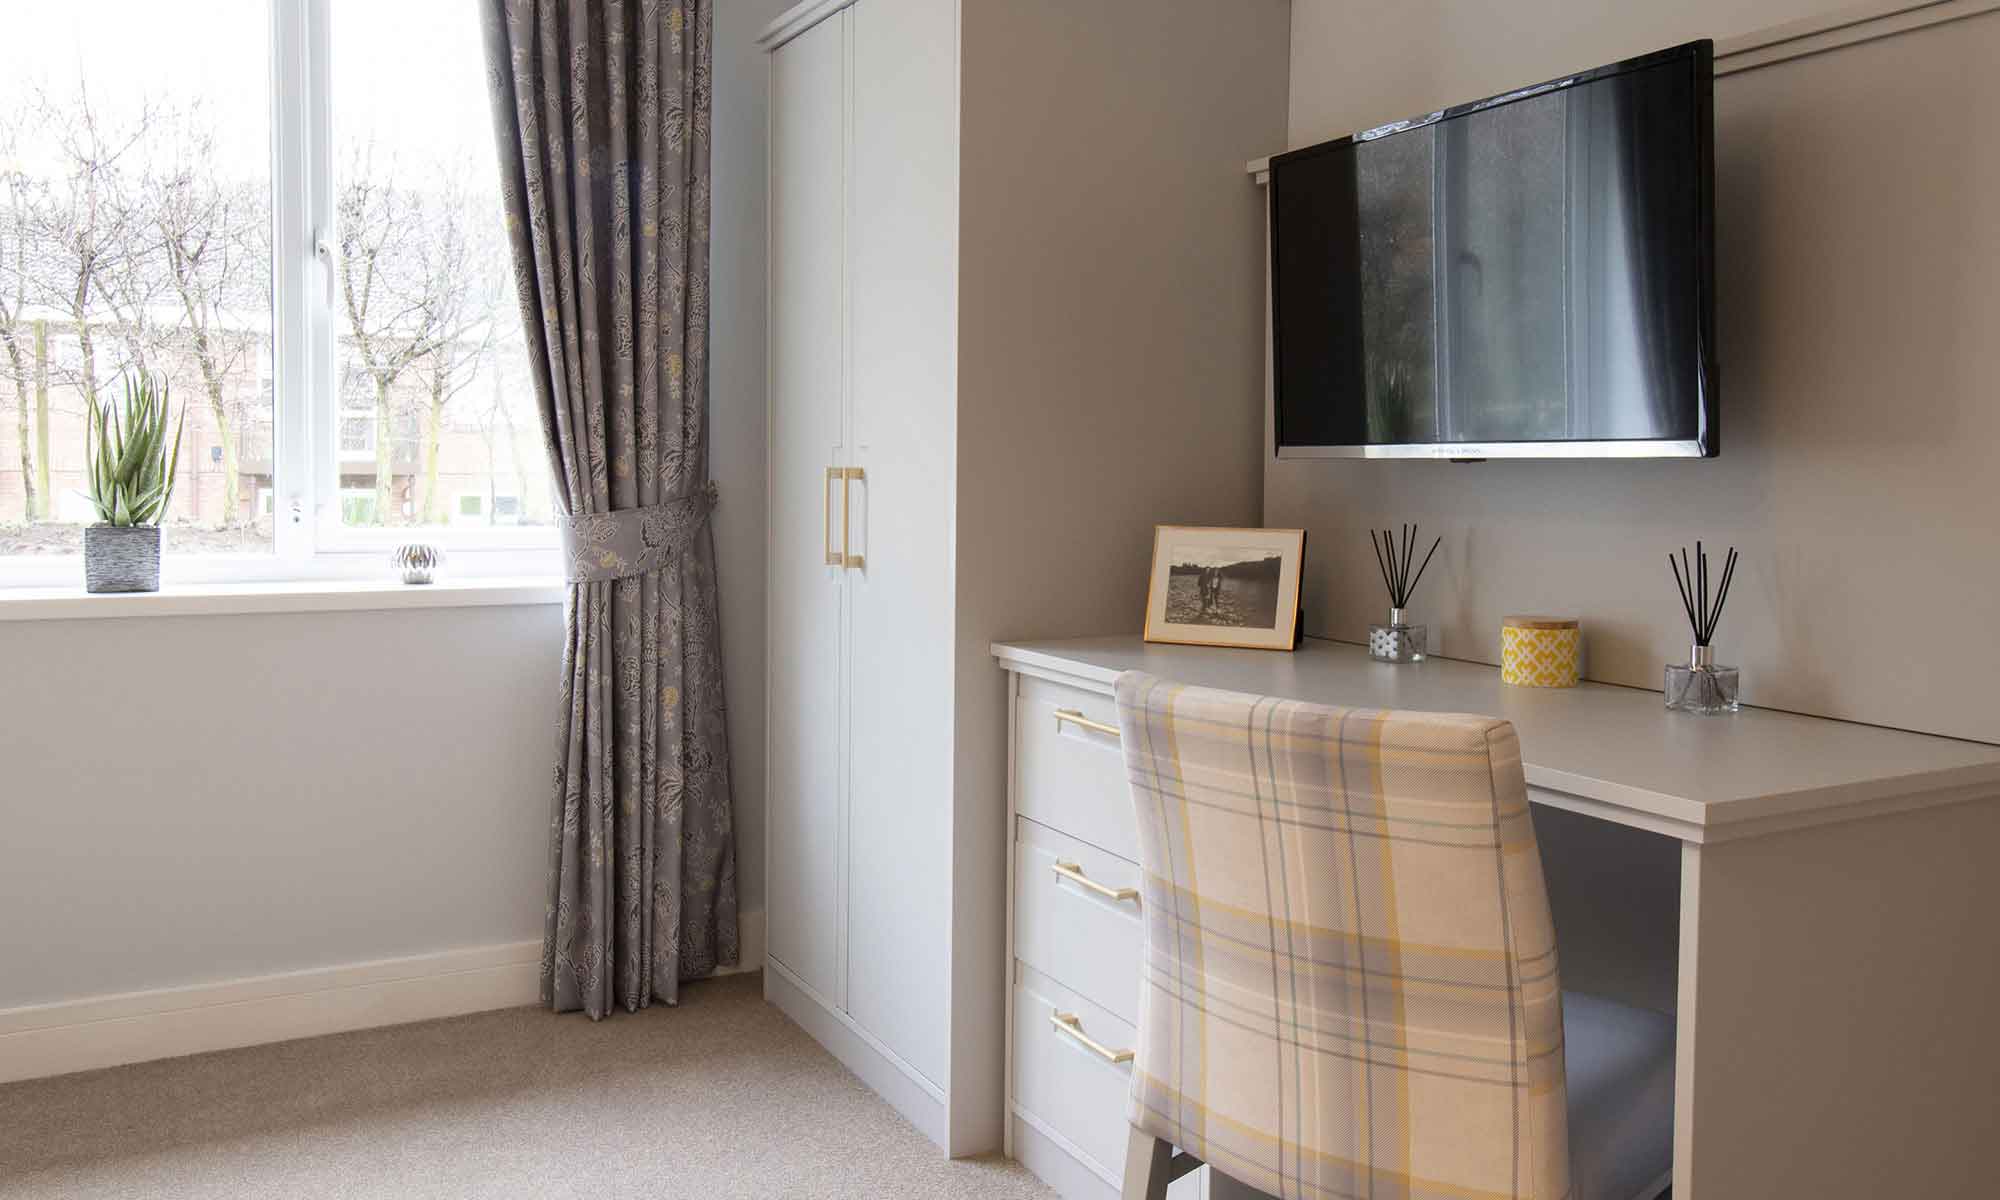 An image of a bedroom interior at St Mary's Care Home in Anlaby. The Windsor double wardrobe and dressing table in light grey with gold metallic handles. A dressing table chair in soft grey and mustard check fabric.